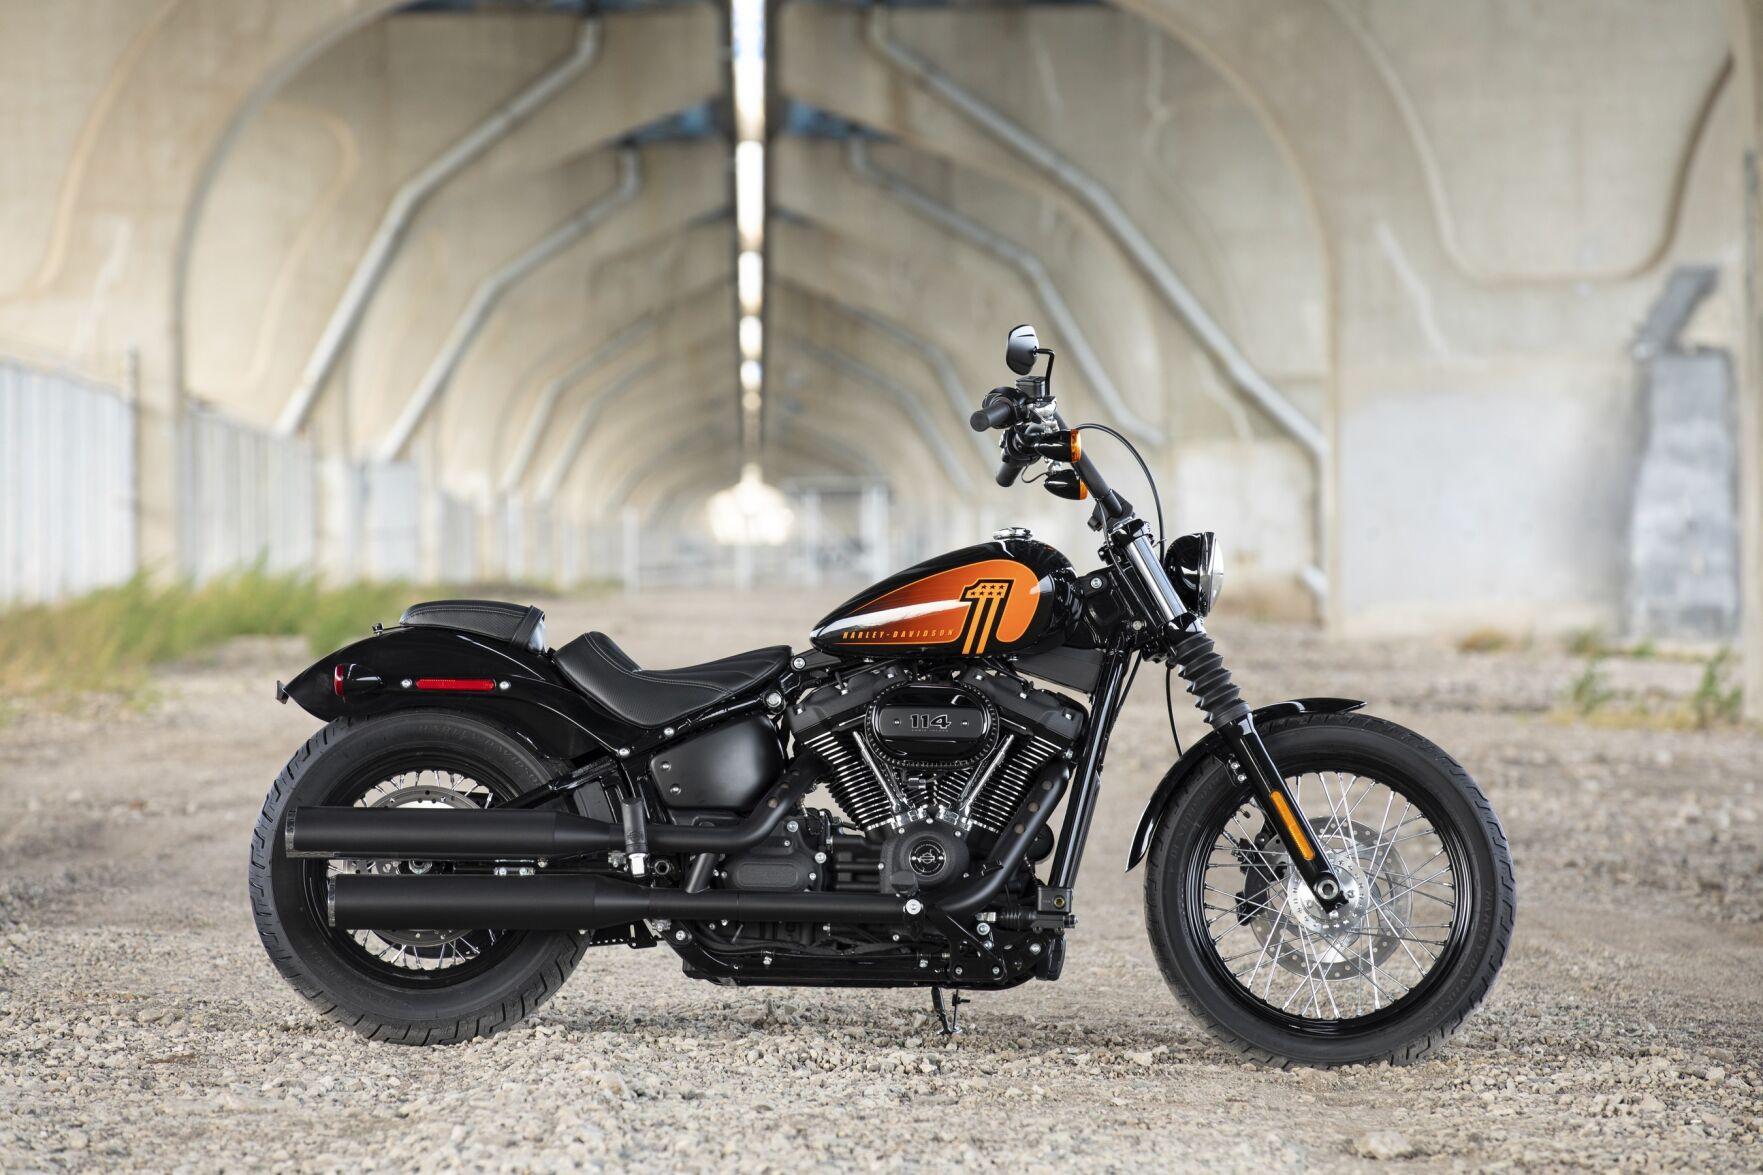 Harley Davidson Unveils 2021 Lineup Includes Restyled Bikes Business Gmtoday Com